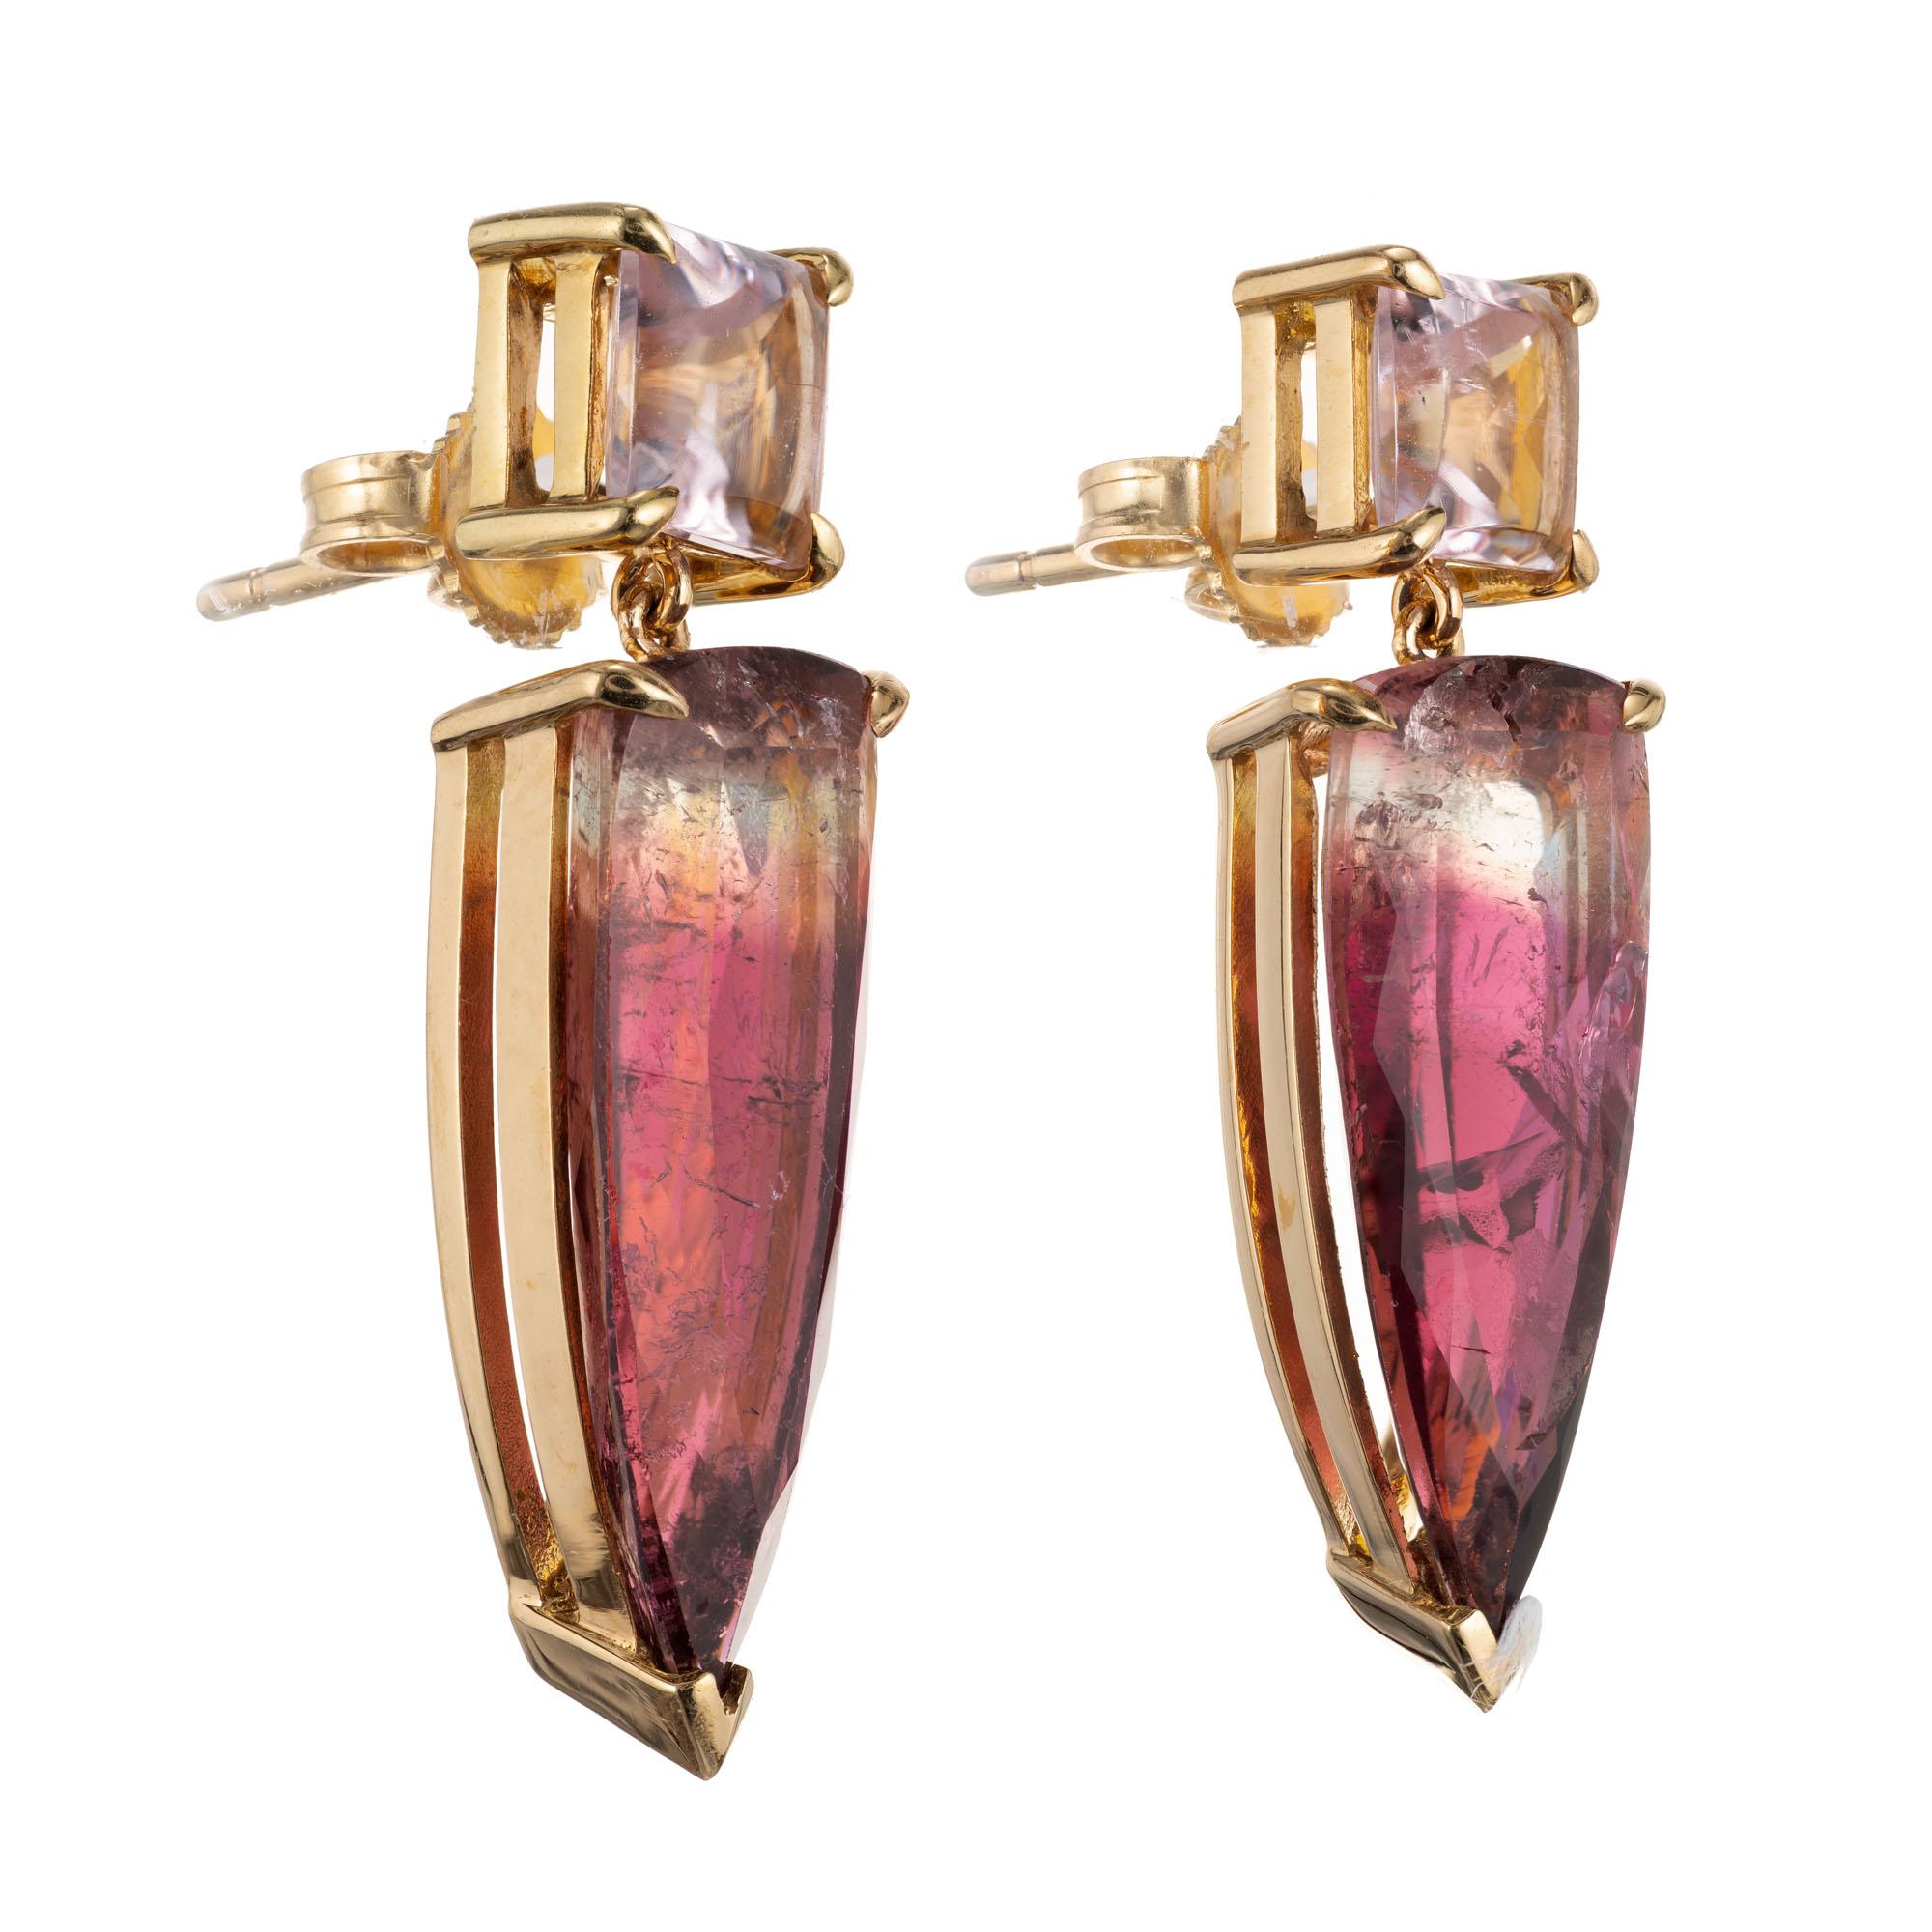 Soft pink, bi-color Tourmaline dangle earrings. 18k yellow gold handmade setting from the Peter Suchy Workshop.

2 square 5.8mm pink Tourmaline, approx. total weight, 2.00ct
2 bi color Tourmaline moderately included, approx. total weight 10.30cts,